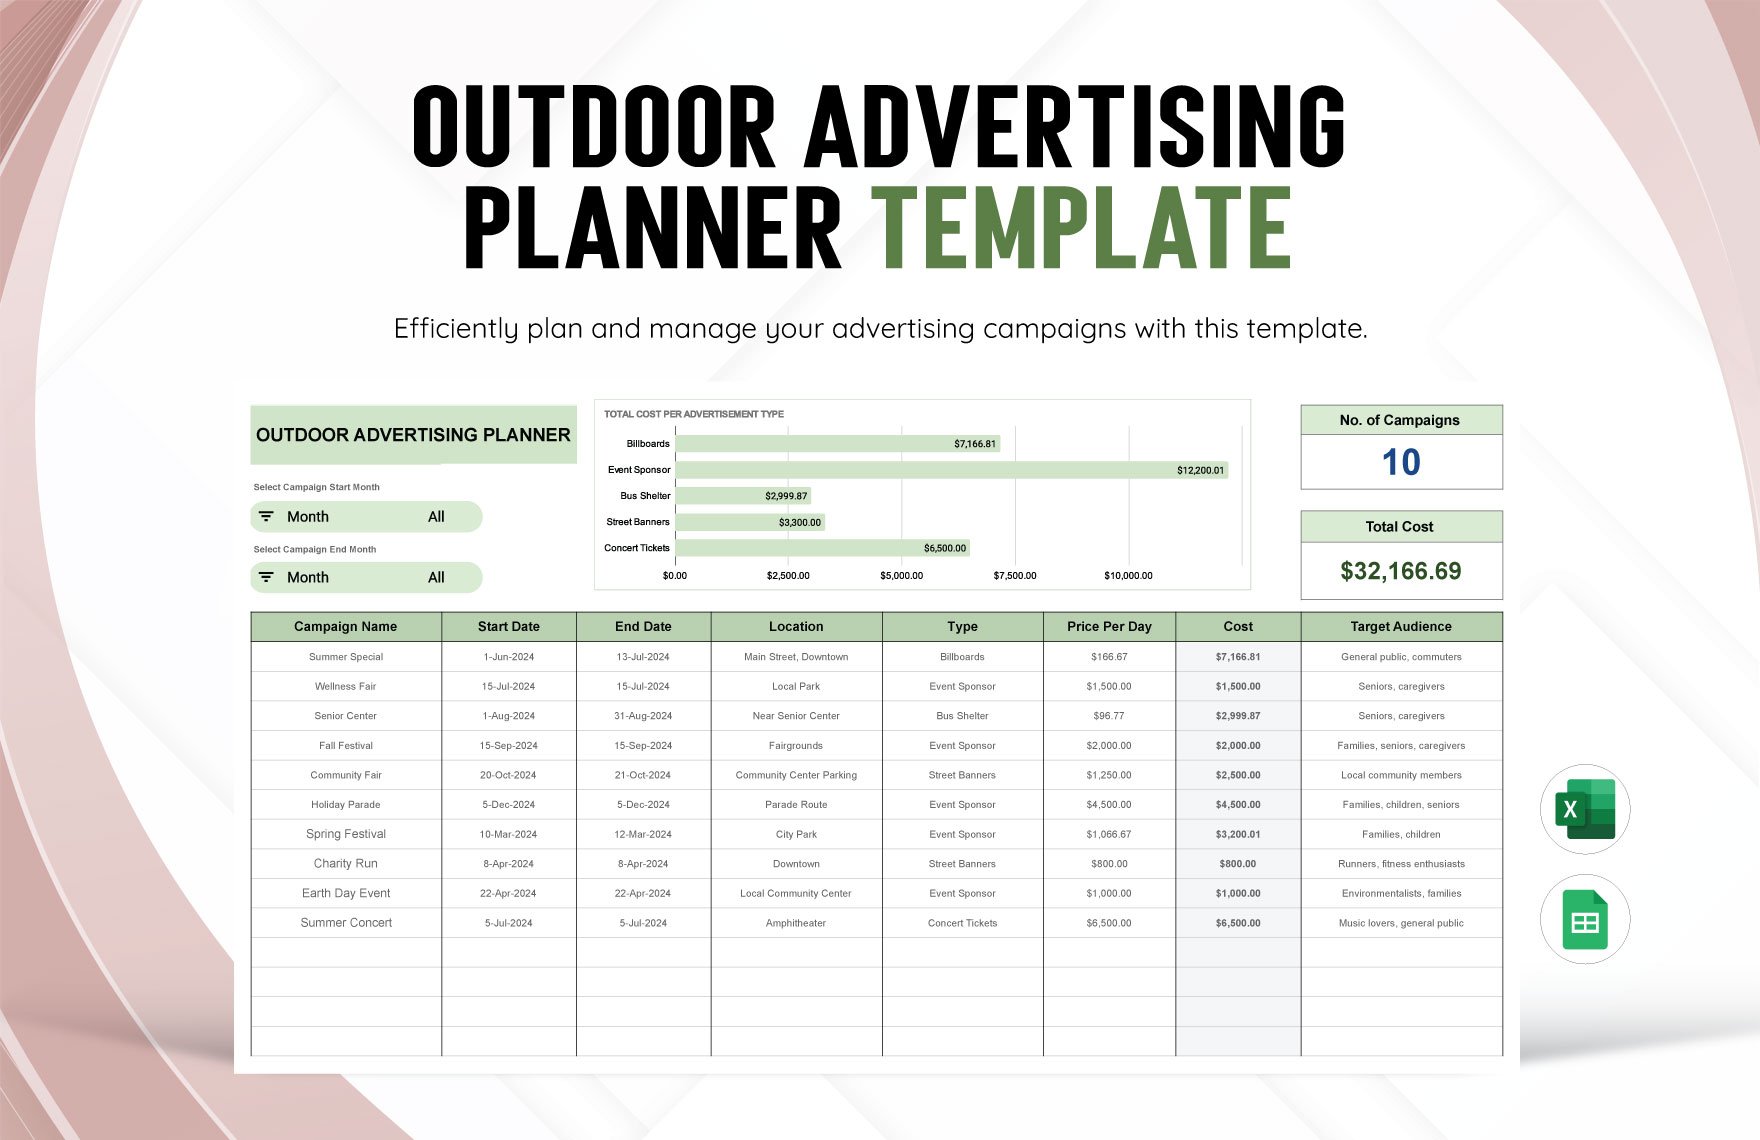 Outdoor Advertising Planner Template in Excel, Google Sheets